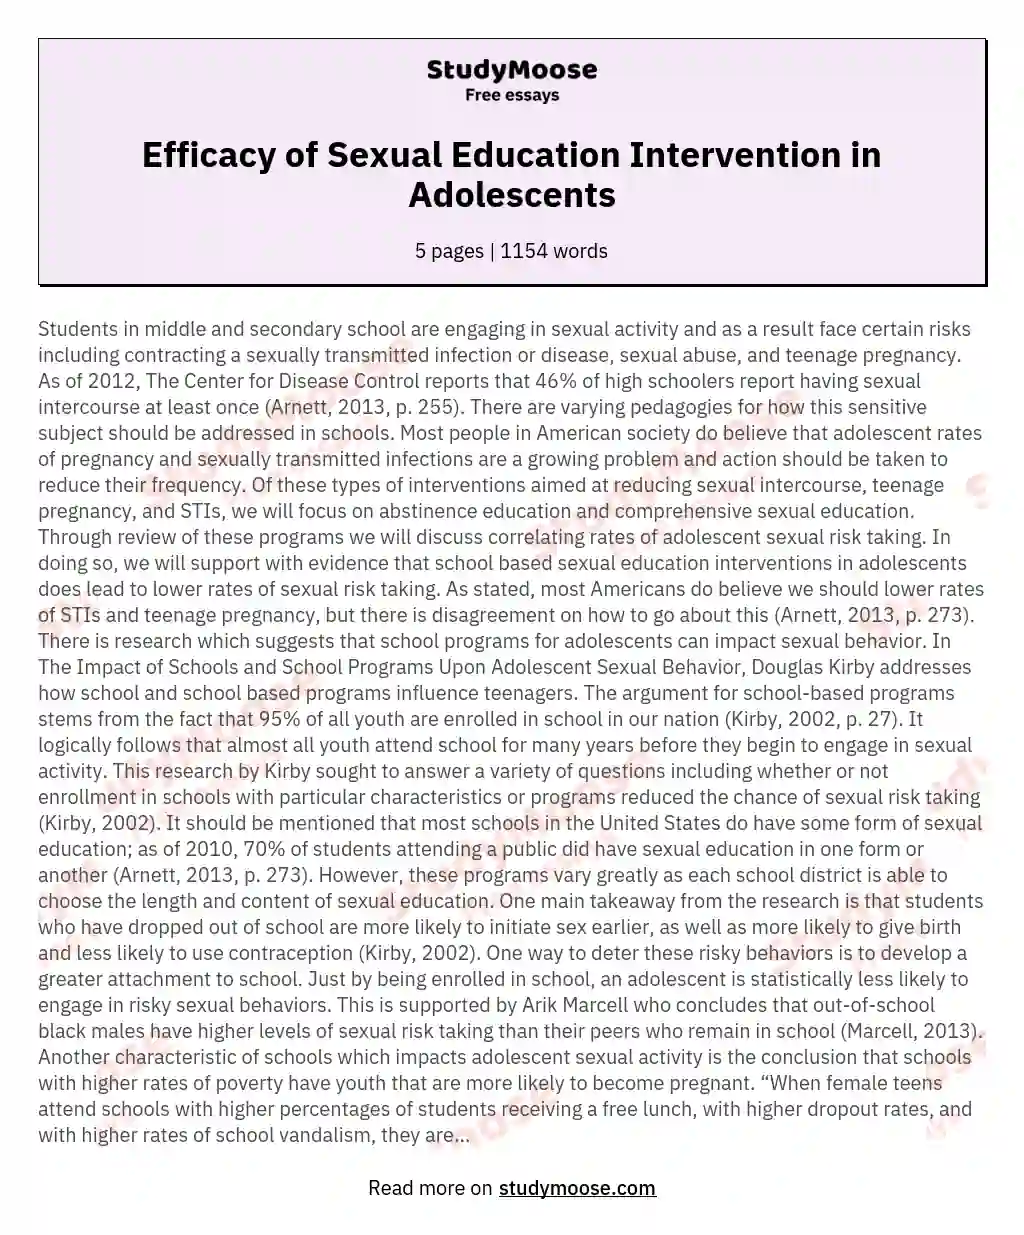 Efficacy of Sexual Education Intervention in Adolescents essay